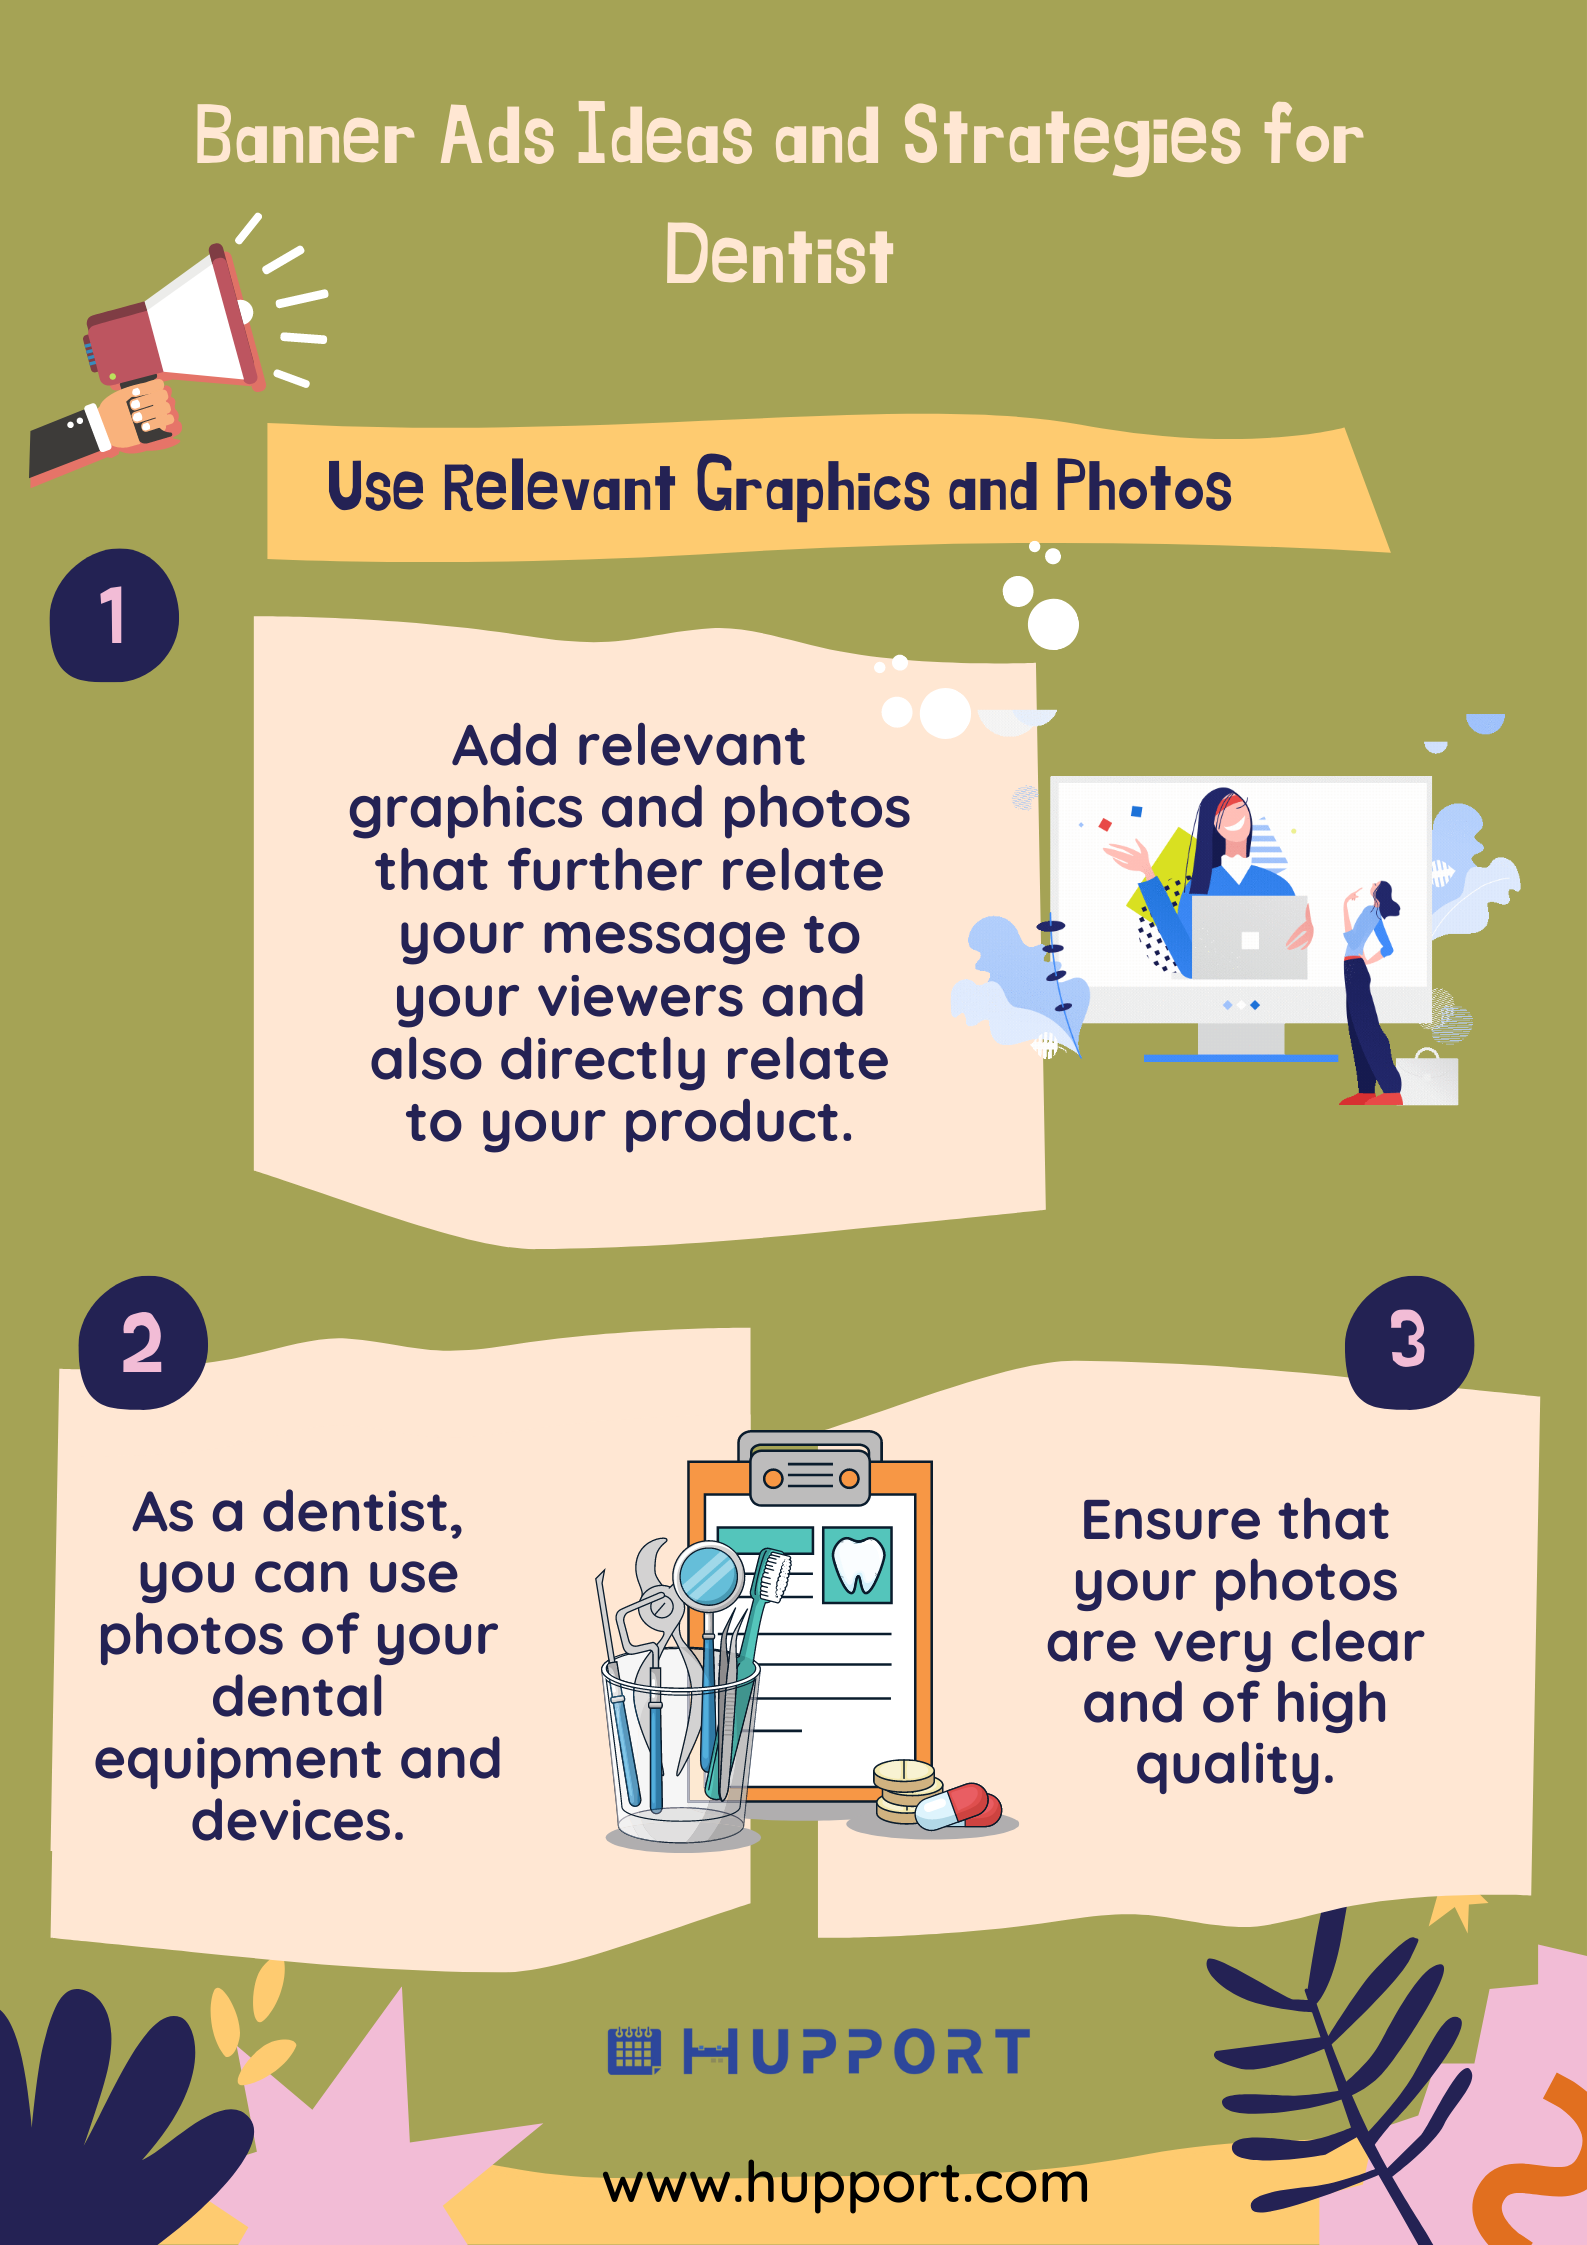 Banner Ads Ideas for dentist: Use Relevant Graphics and Photos